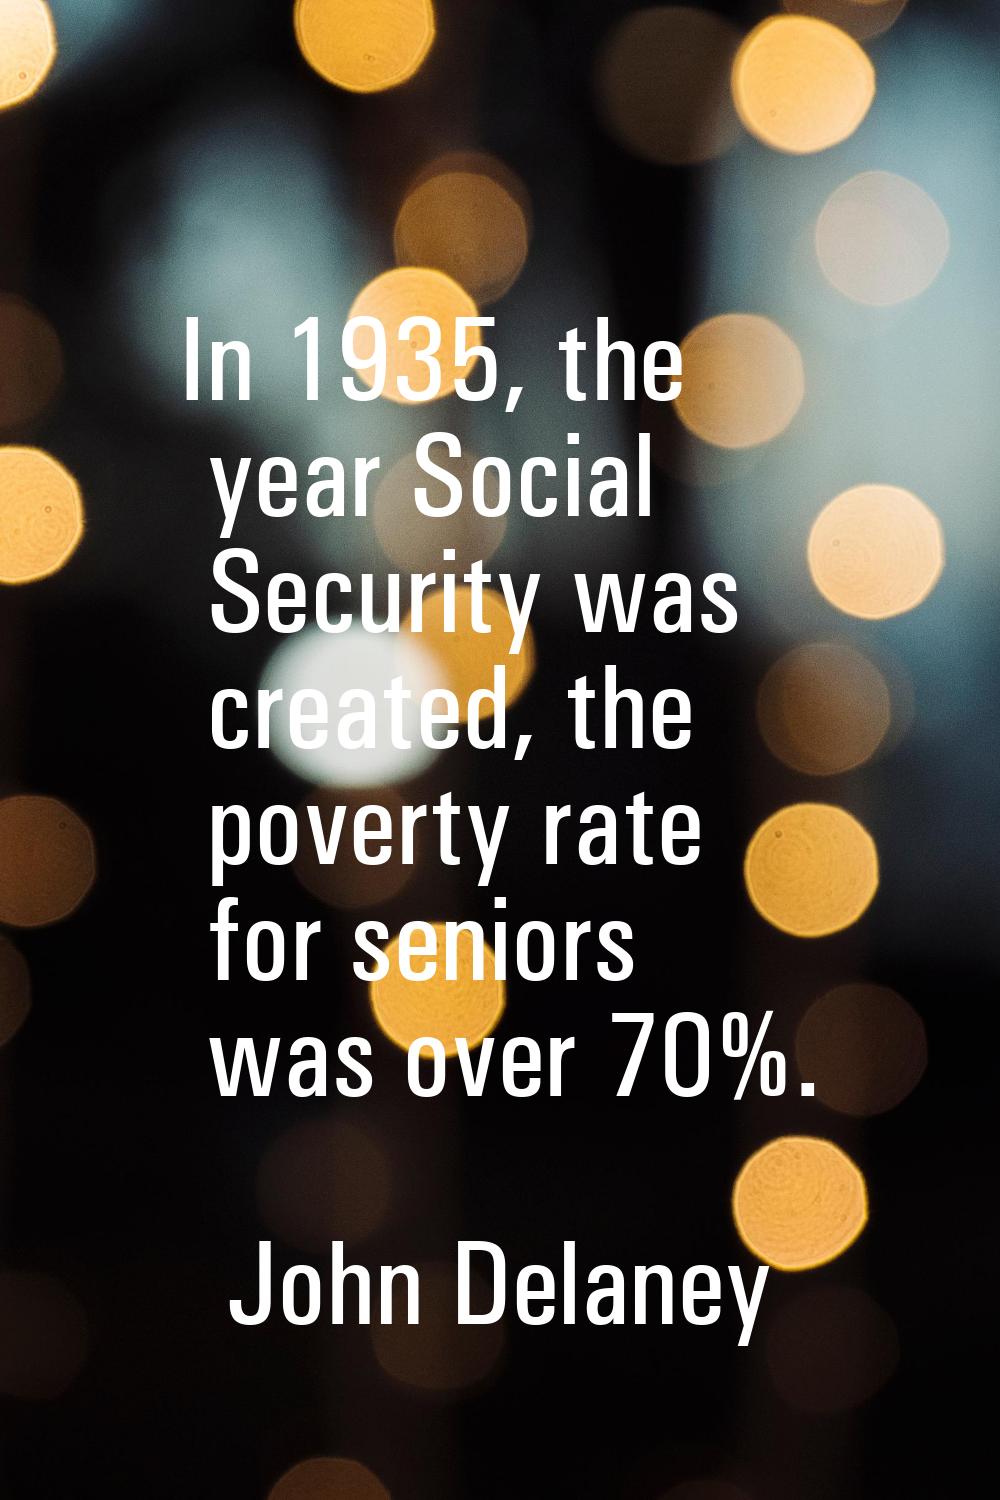 In 1935, the year Social Security was created, the poverty rate for seniors was over 70%.